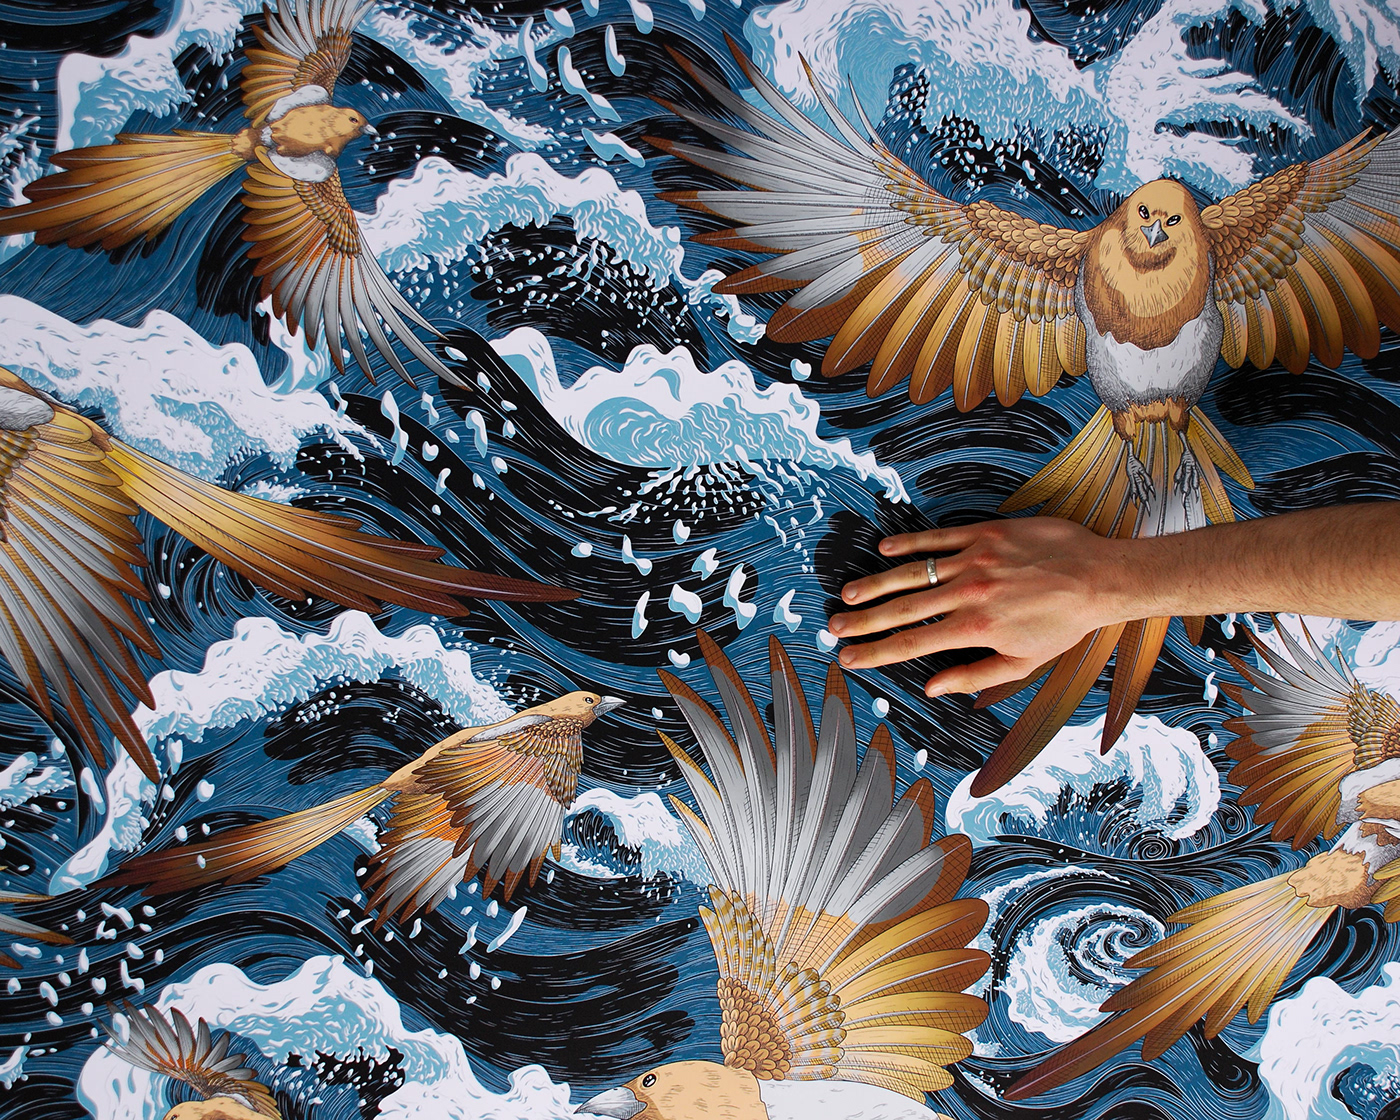 Photograph of wallpaper showing an illustration of magpies flying above the ocean.